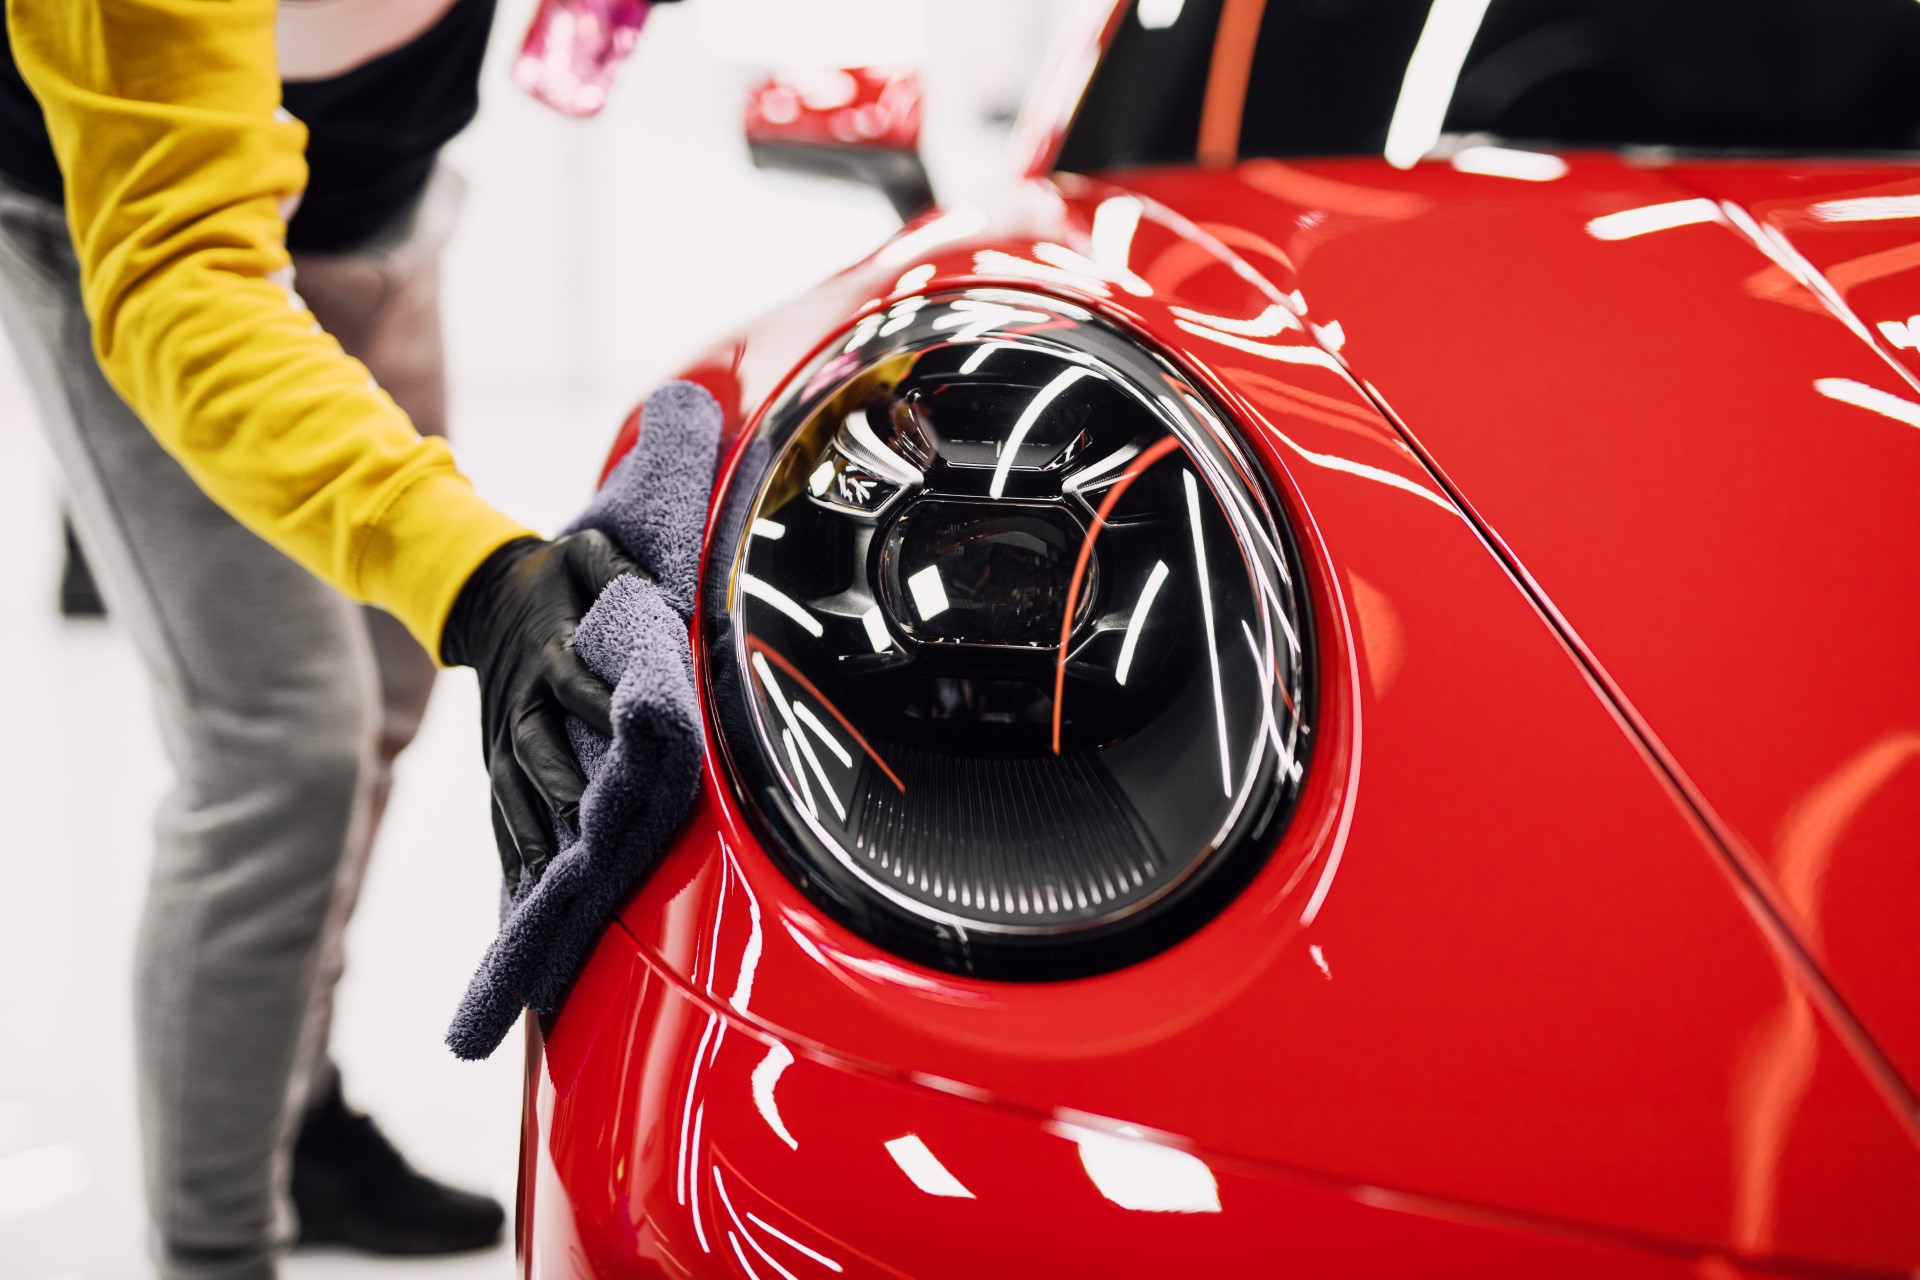 https://colonialcw.com/wp-content/uploads/2021/06/stock-photo-a-man-cleaning-car-with-cloth-car-detailing-or-valeting-concept-selective-focus-1681005784.jpg